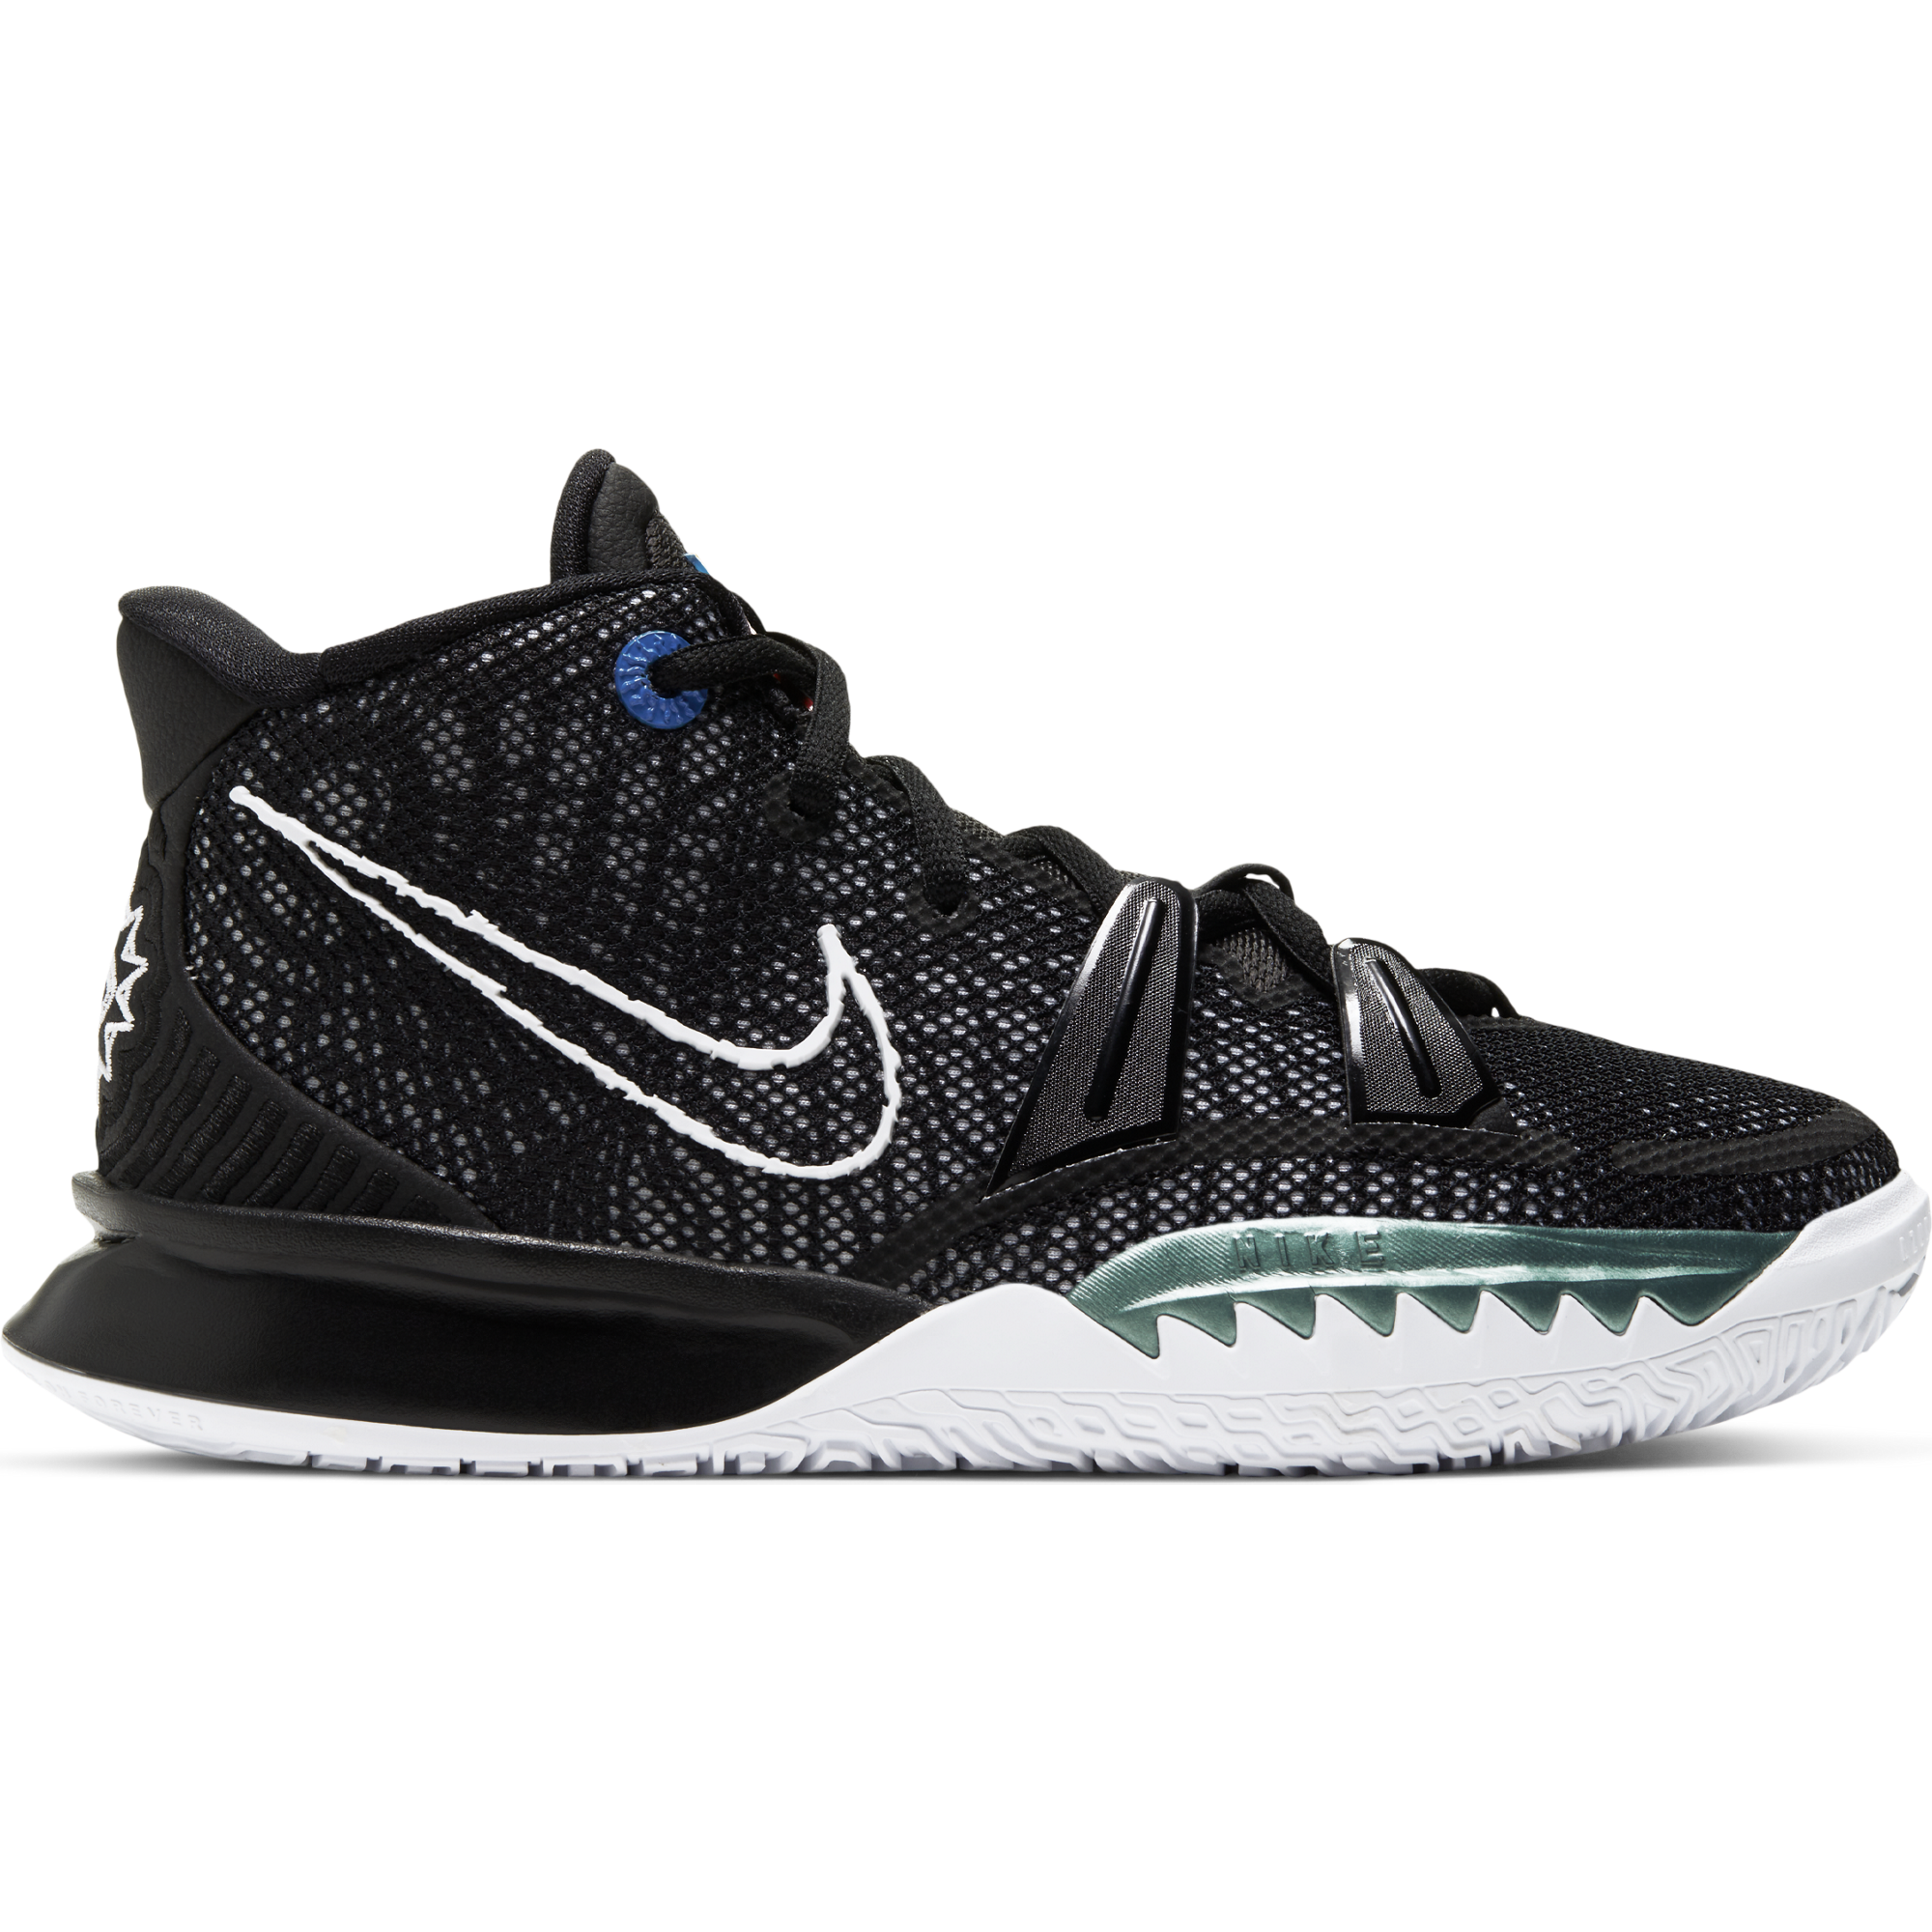 kyrie black and white shoes